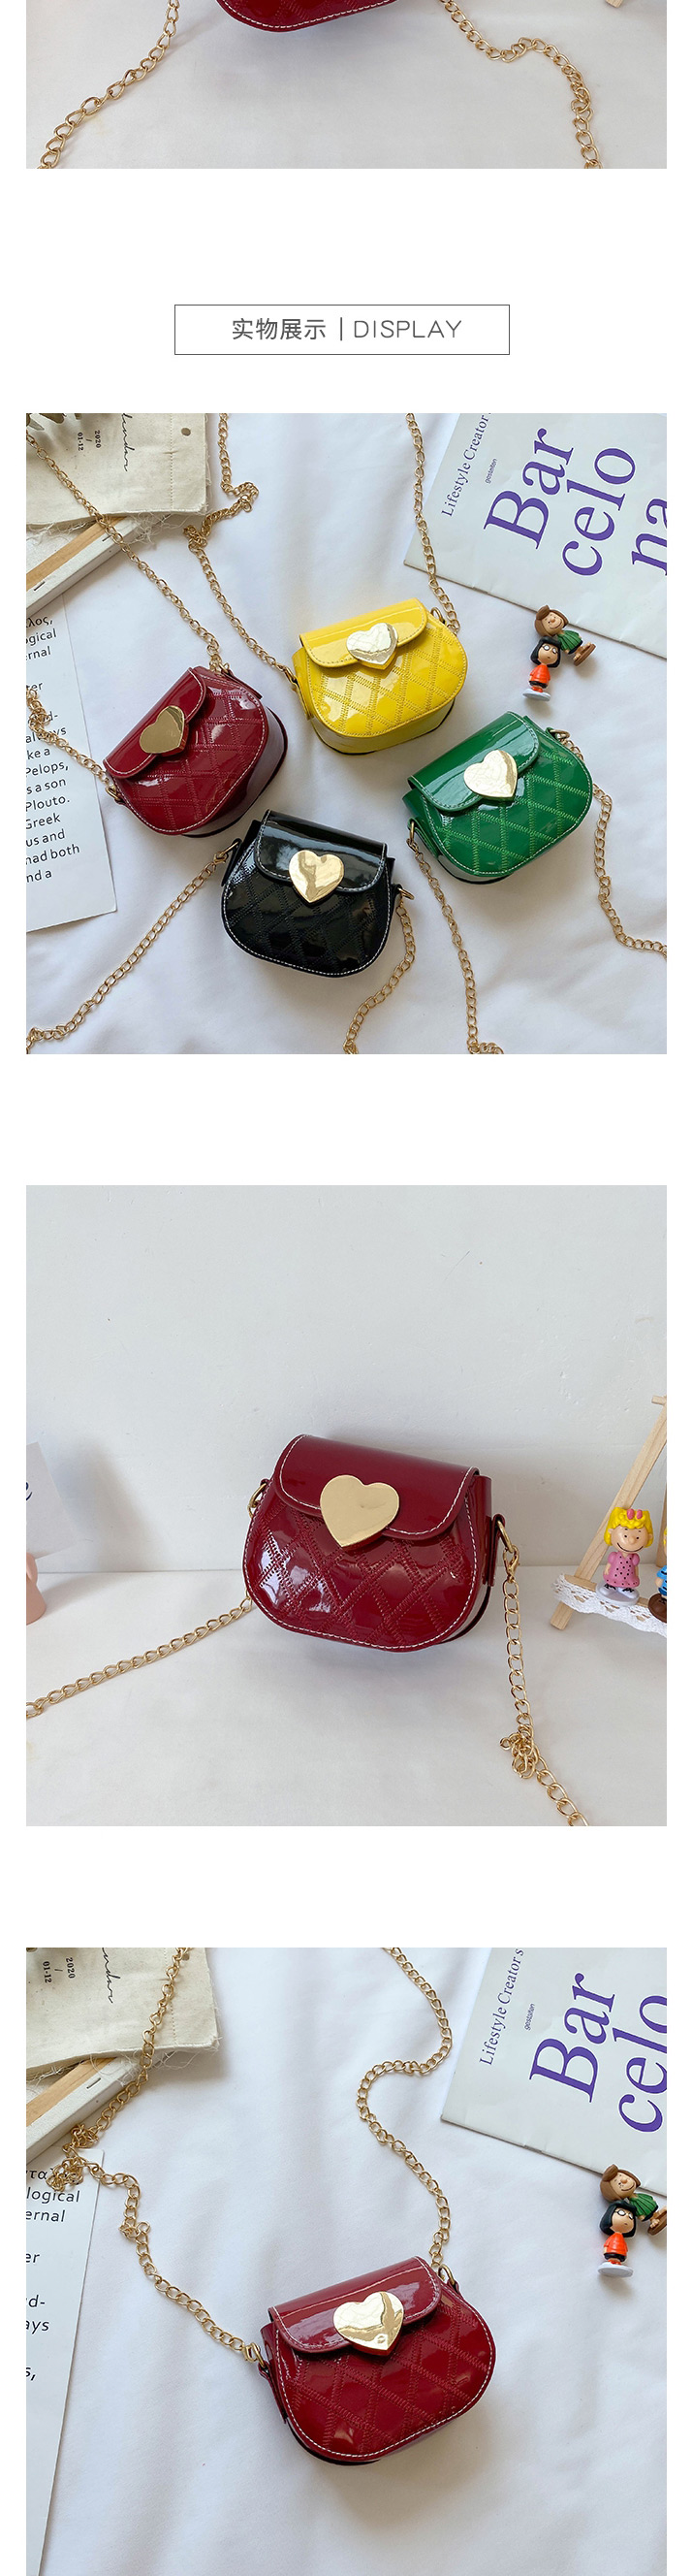 Fashion Green Childrens One-shoulder Diagonal Bag With Chain Love Lock,Shoulder bags